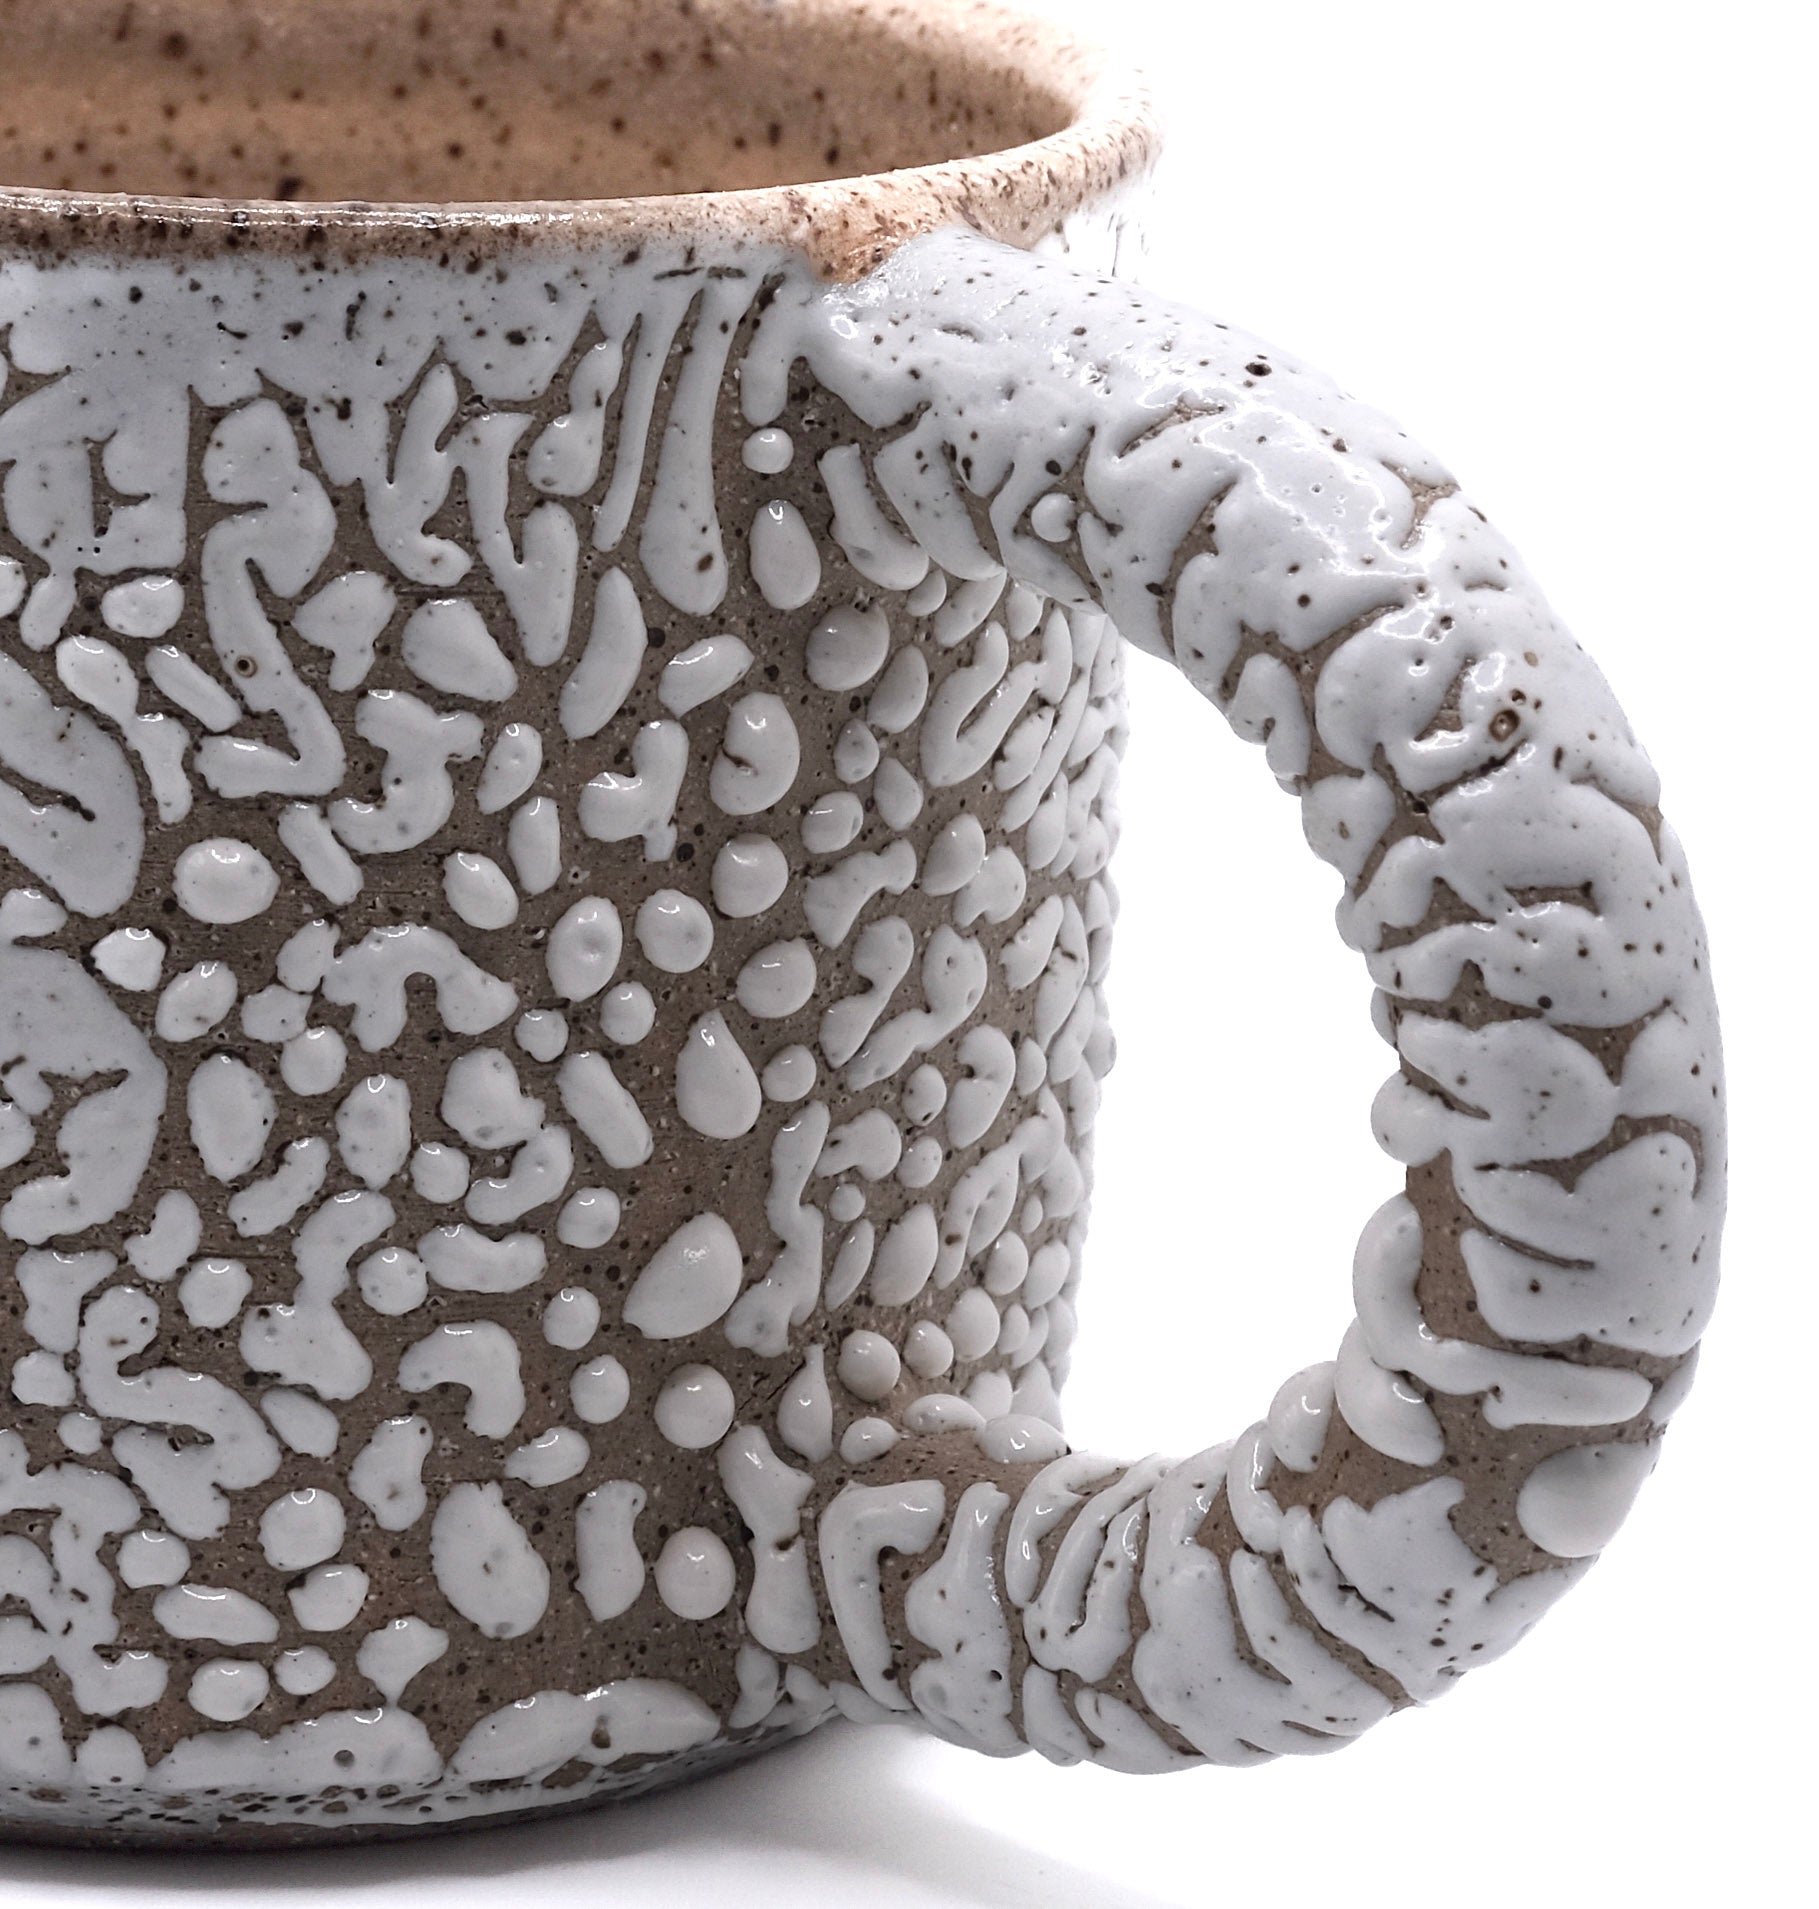 Close-up of fired mug with white bead glaze on dark clay. Gloop-like texture when fired to cone 5 or 6.